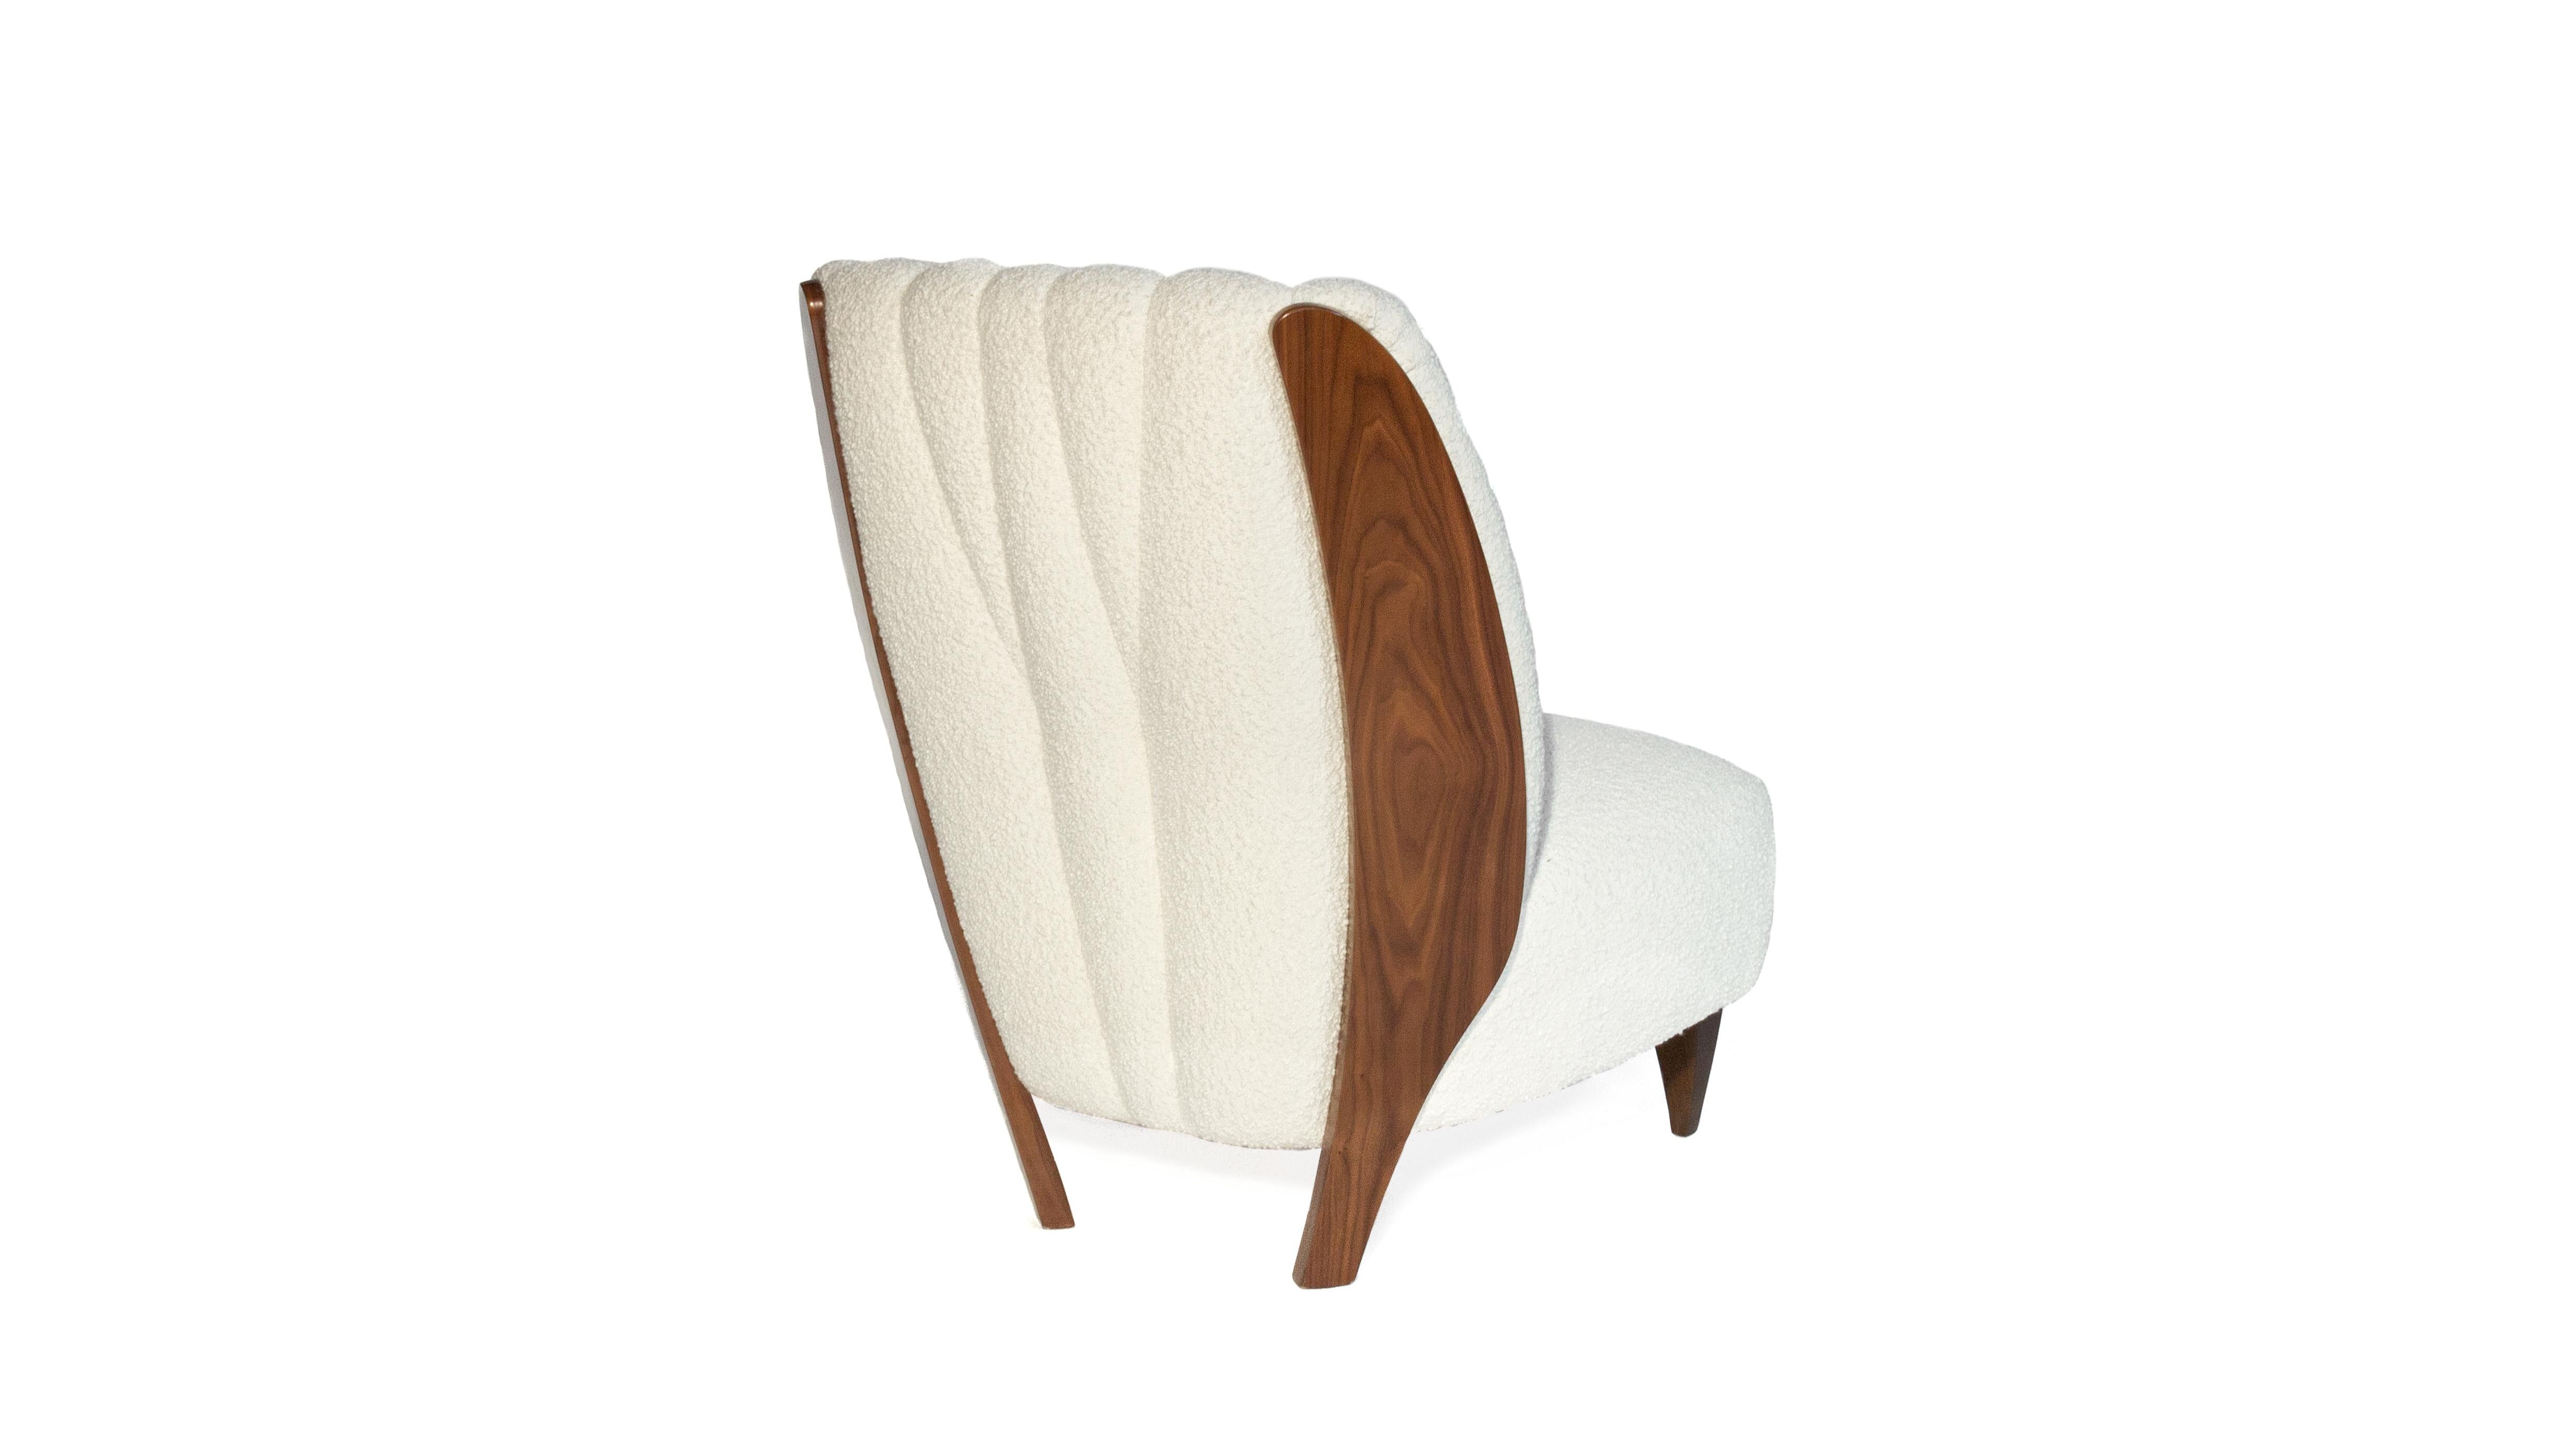 Other Na Pali Armchair by InsidherLand For Sale